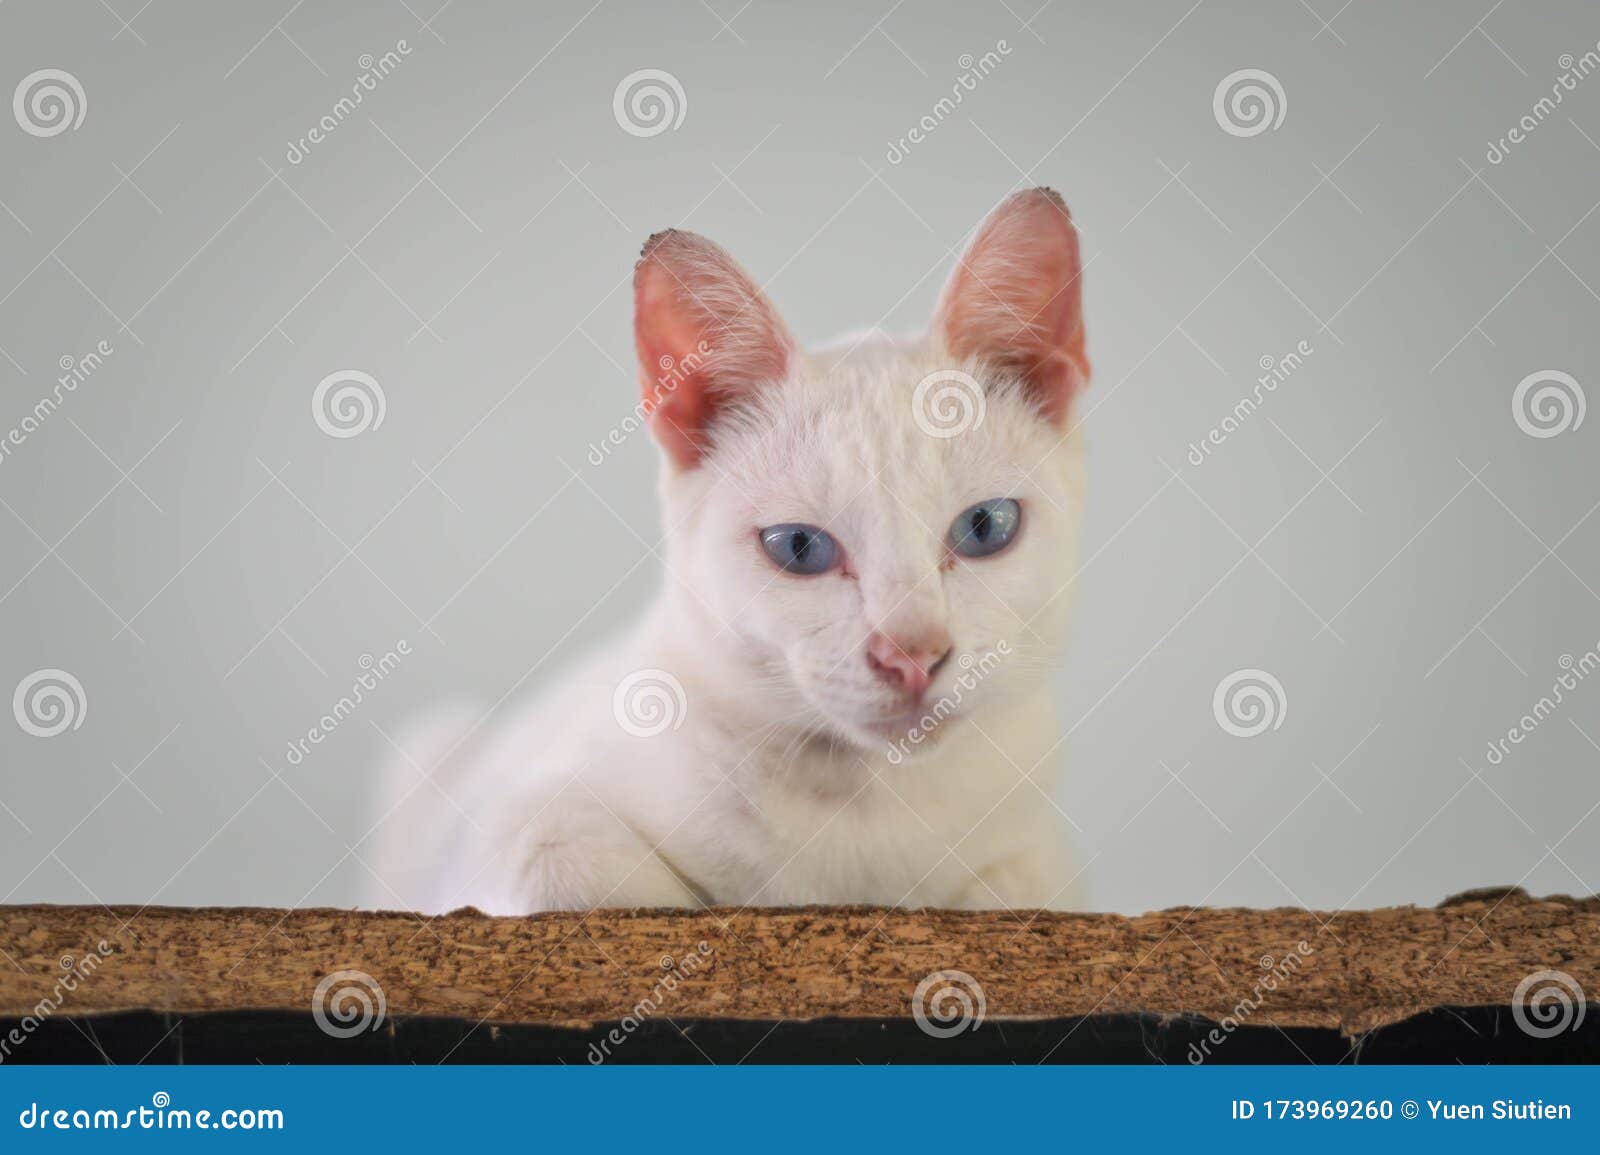 Diamond Eye Cat Khao Manee Is A Rare Breed Of Cat Originating In Thailand Which Has An Ancient Ancestry Tracing Back Hundreds Stock Photo Image Of Looking Khao 173969260